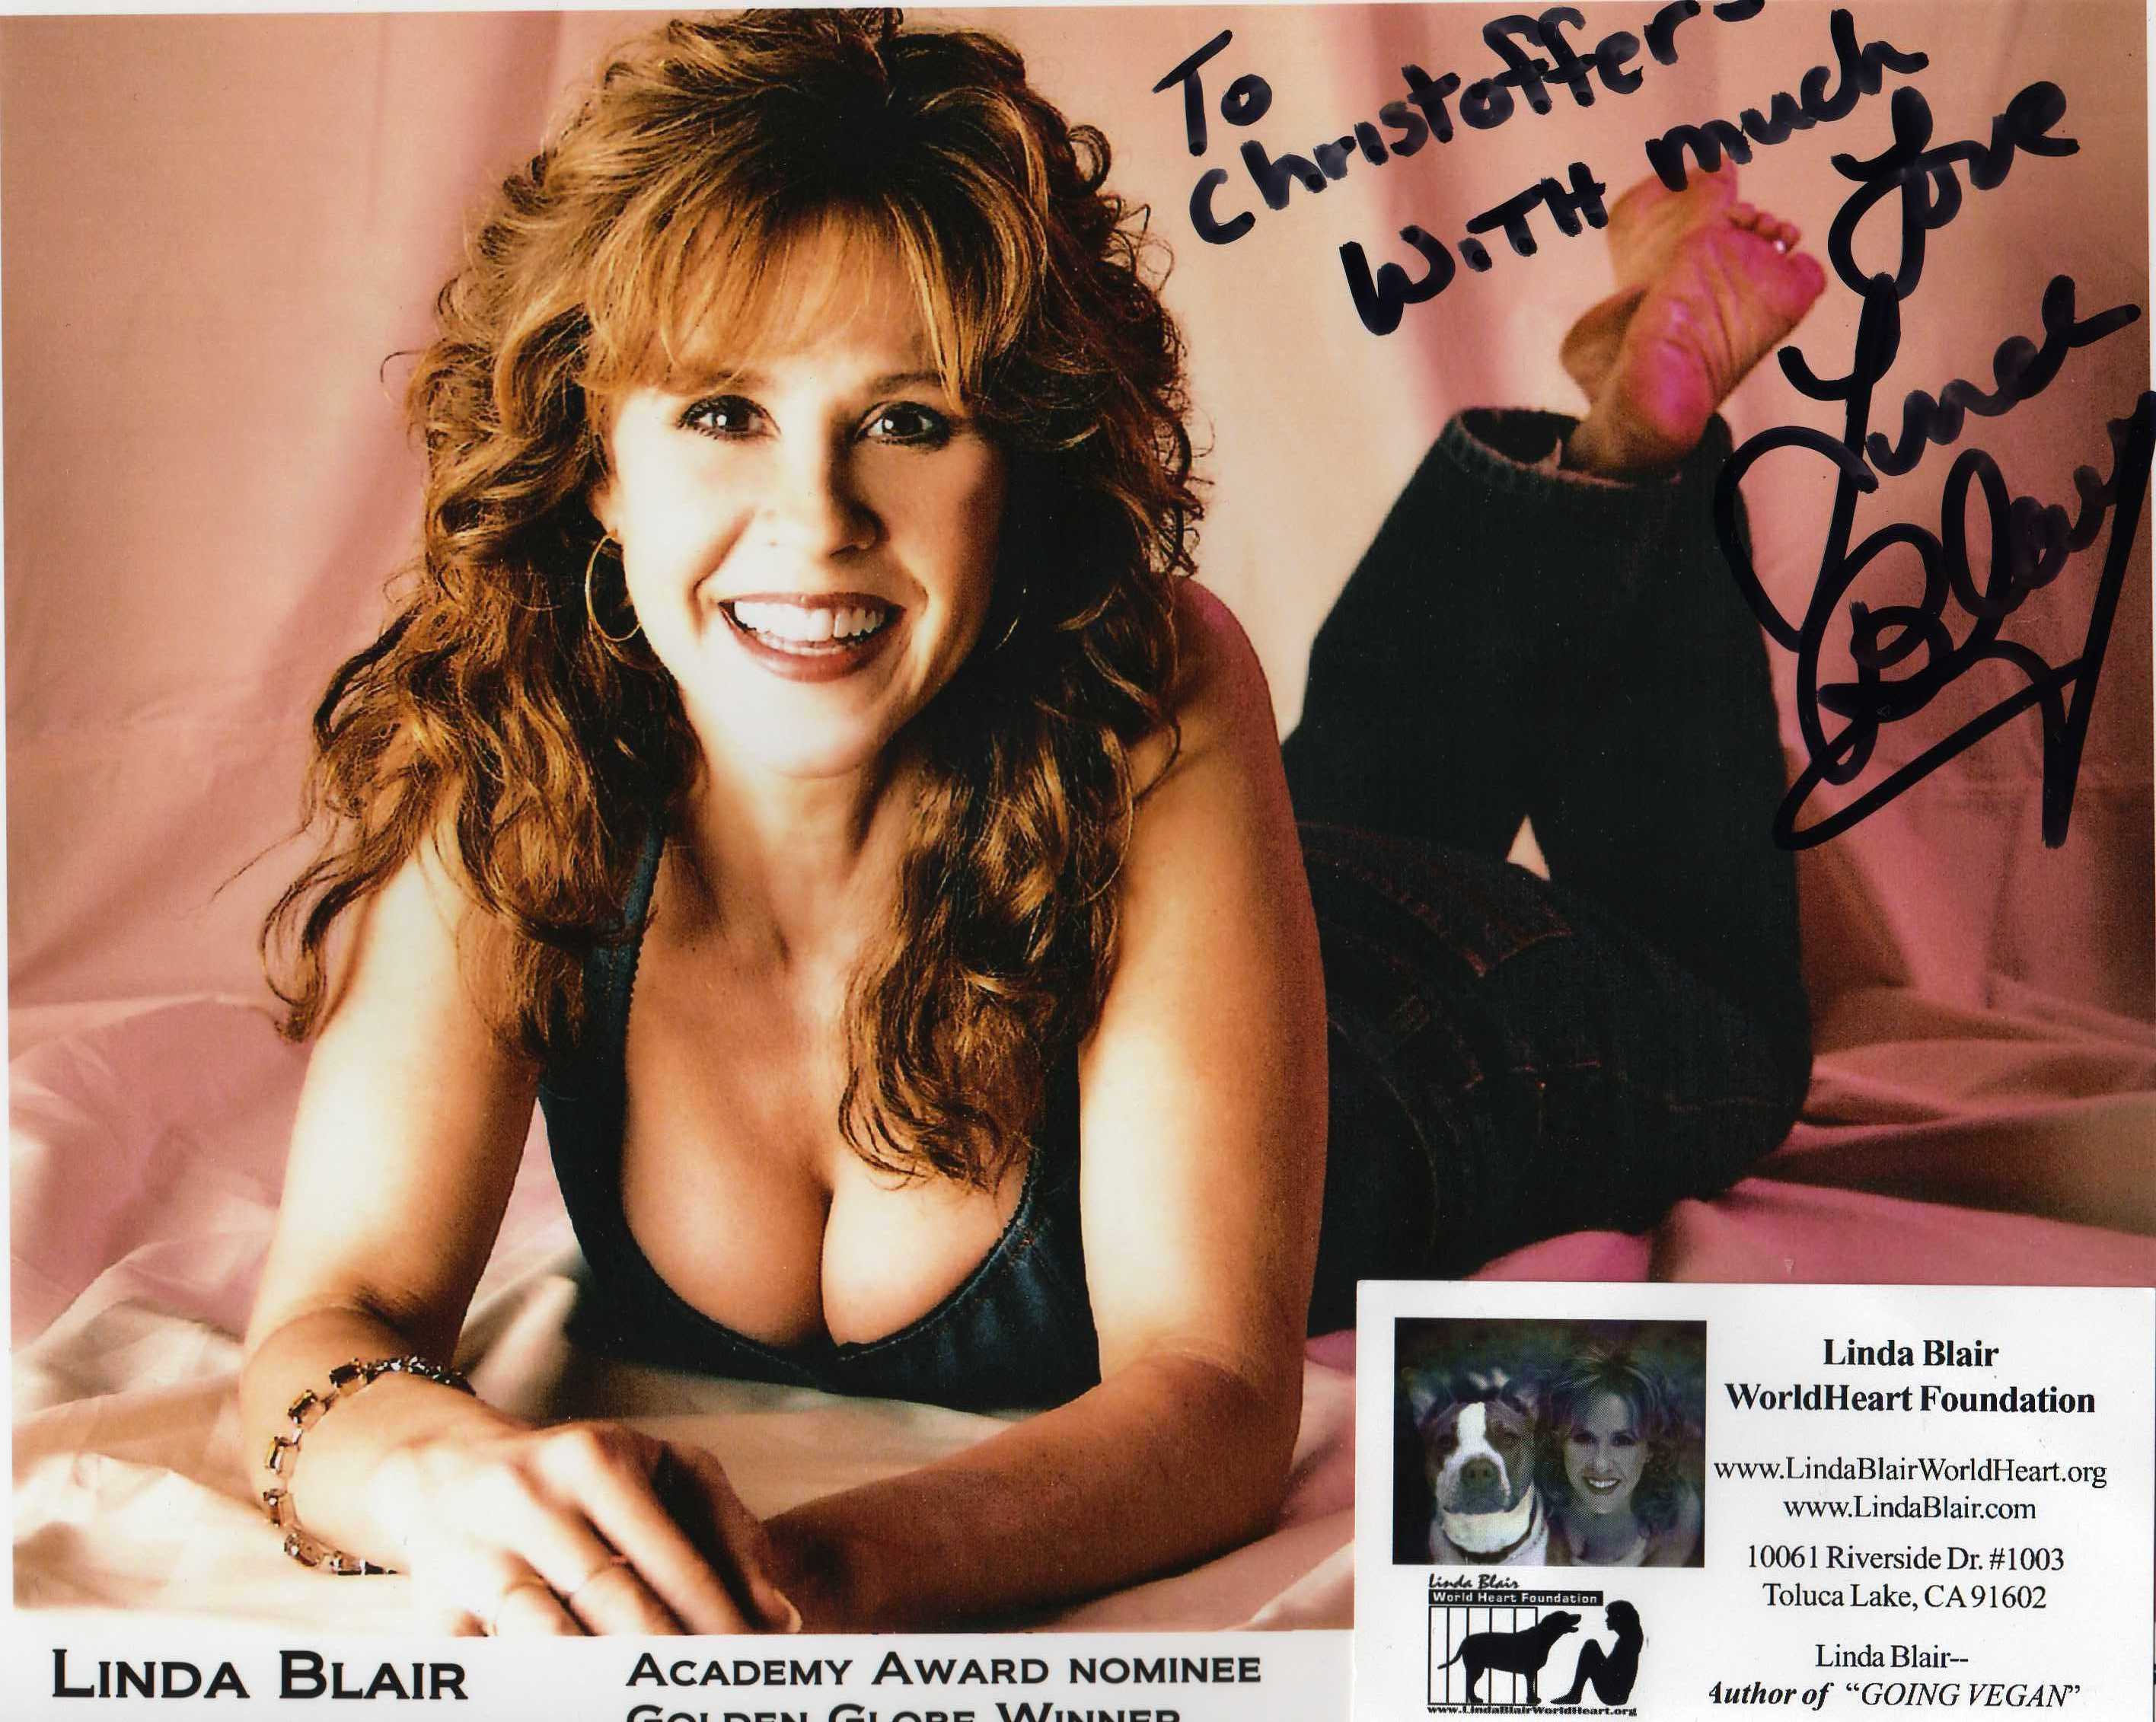 People who liked Linda Blair's feet, also liked.